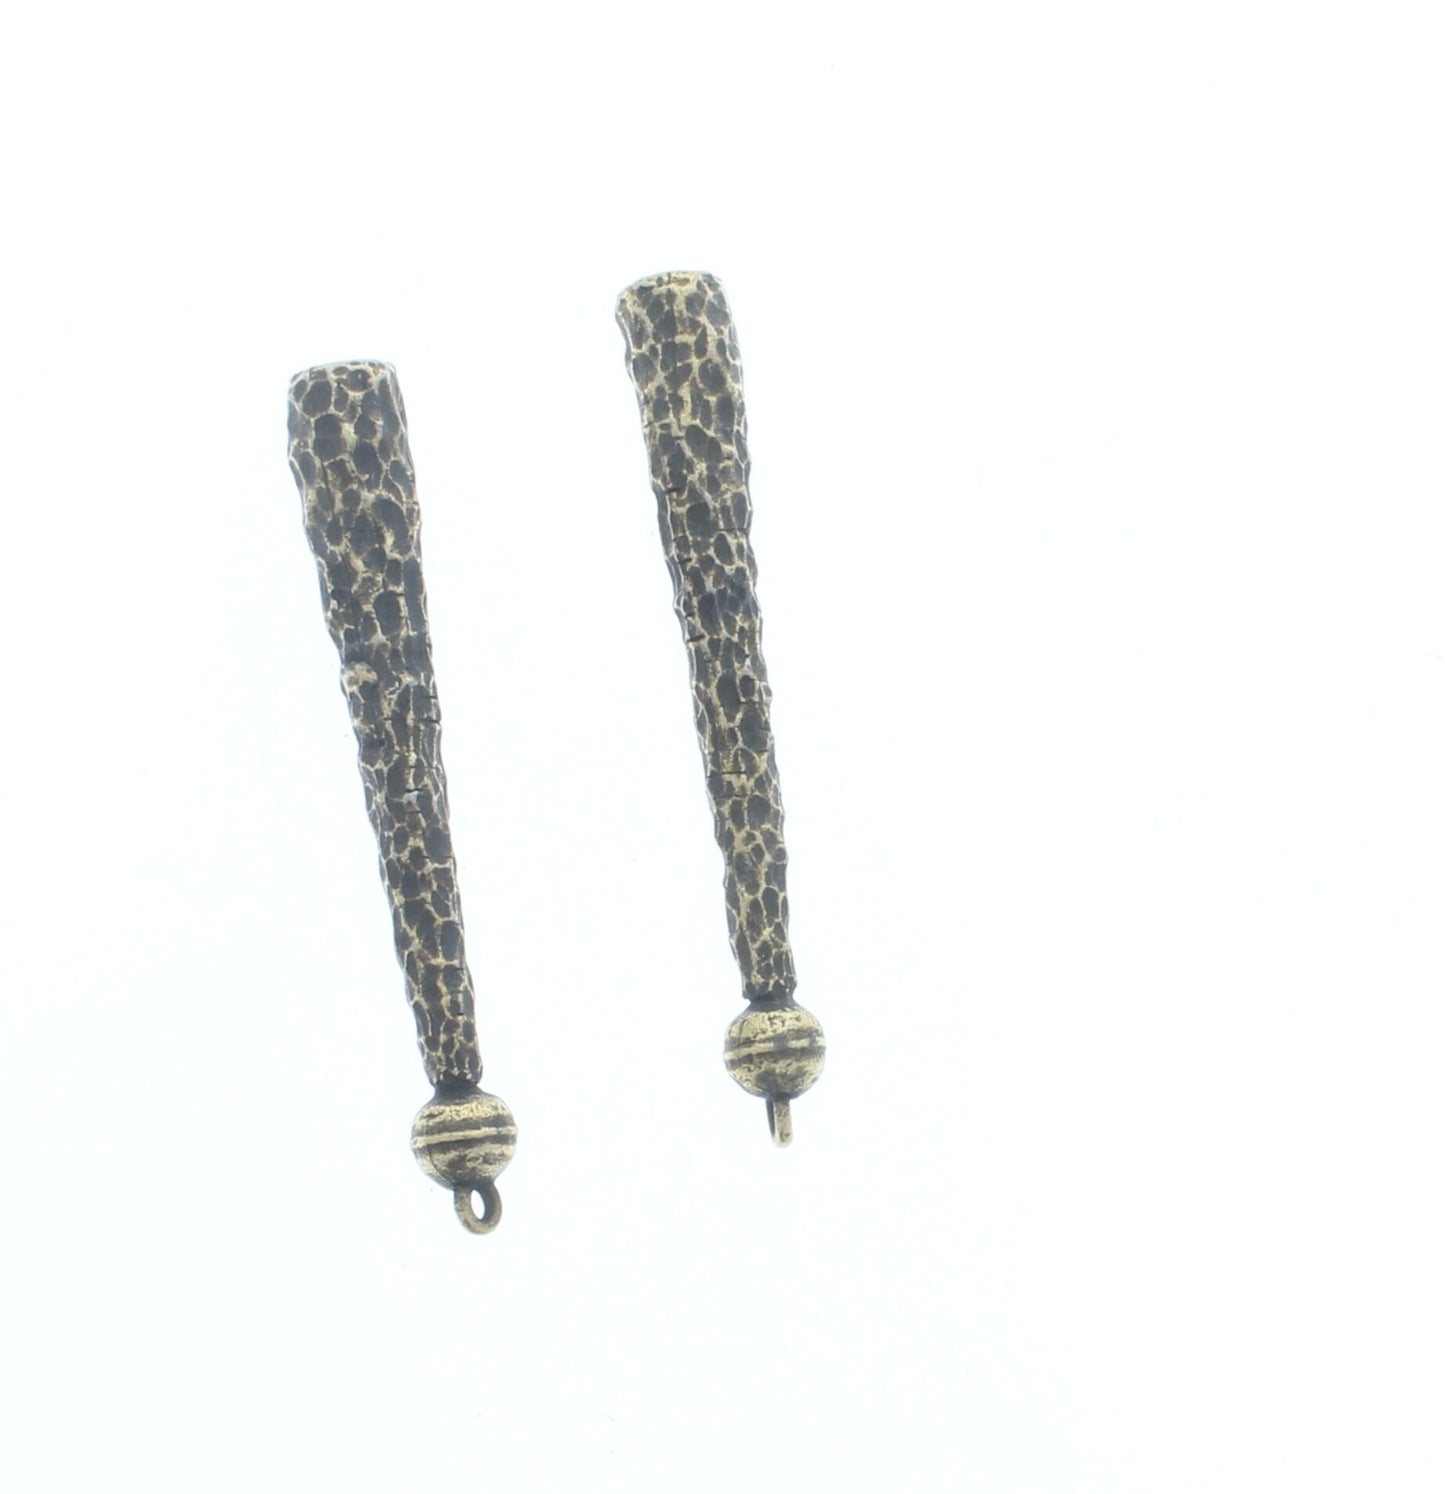 Bolo tip zinc cast, antique silver, antique gold, or rustic black metal hammered texture, pack of 2